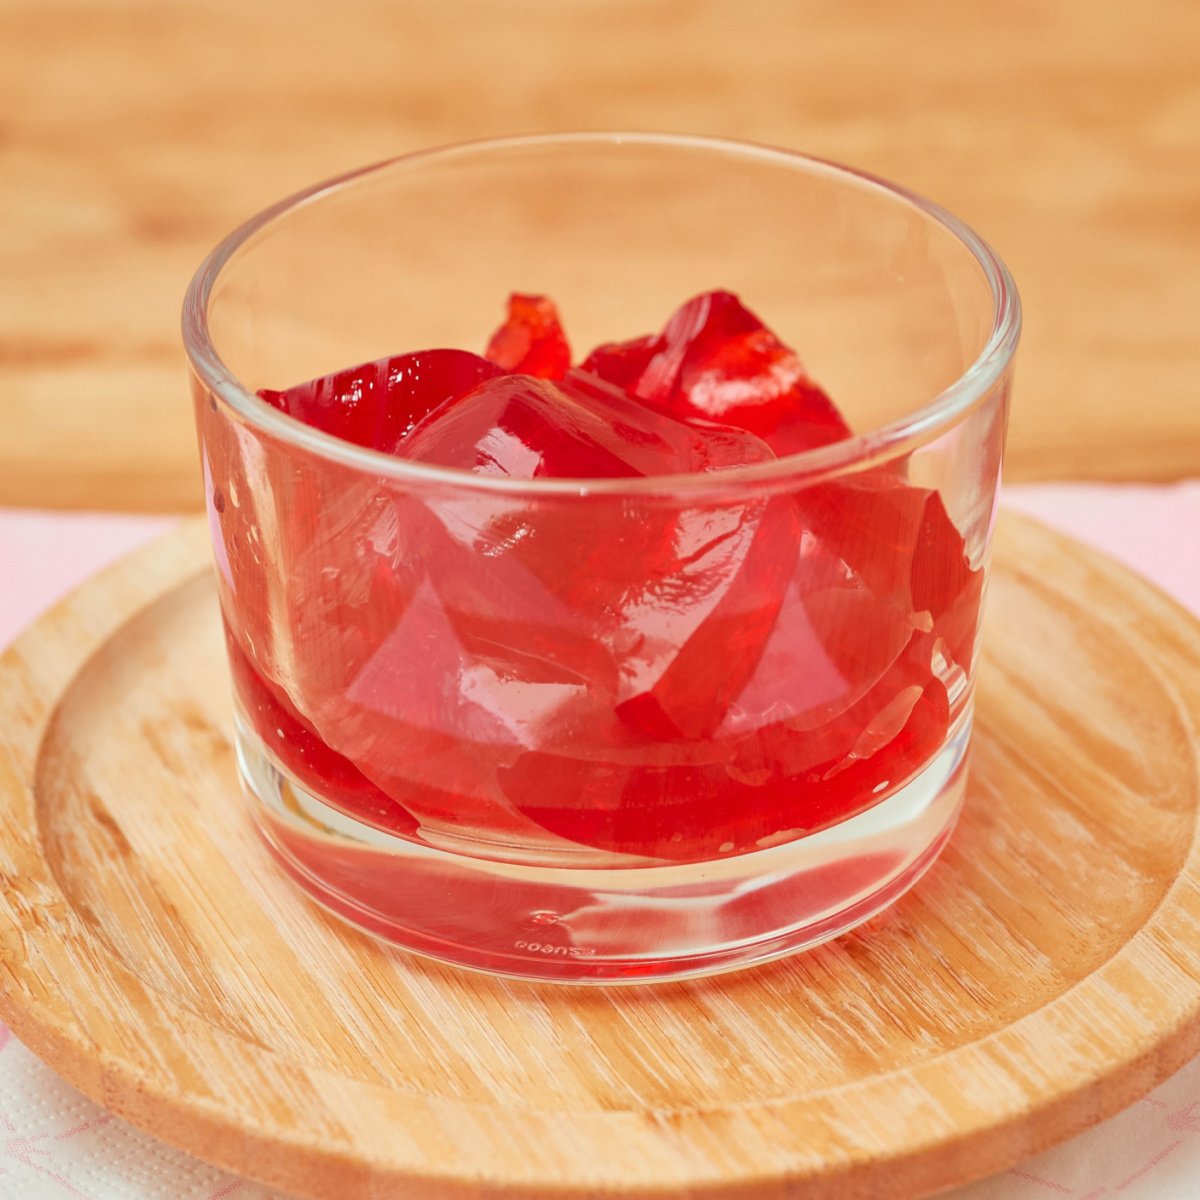 strawberry jello cubes in small glass cup